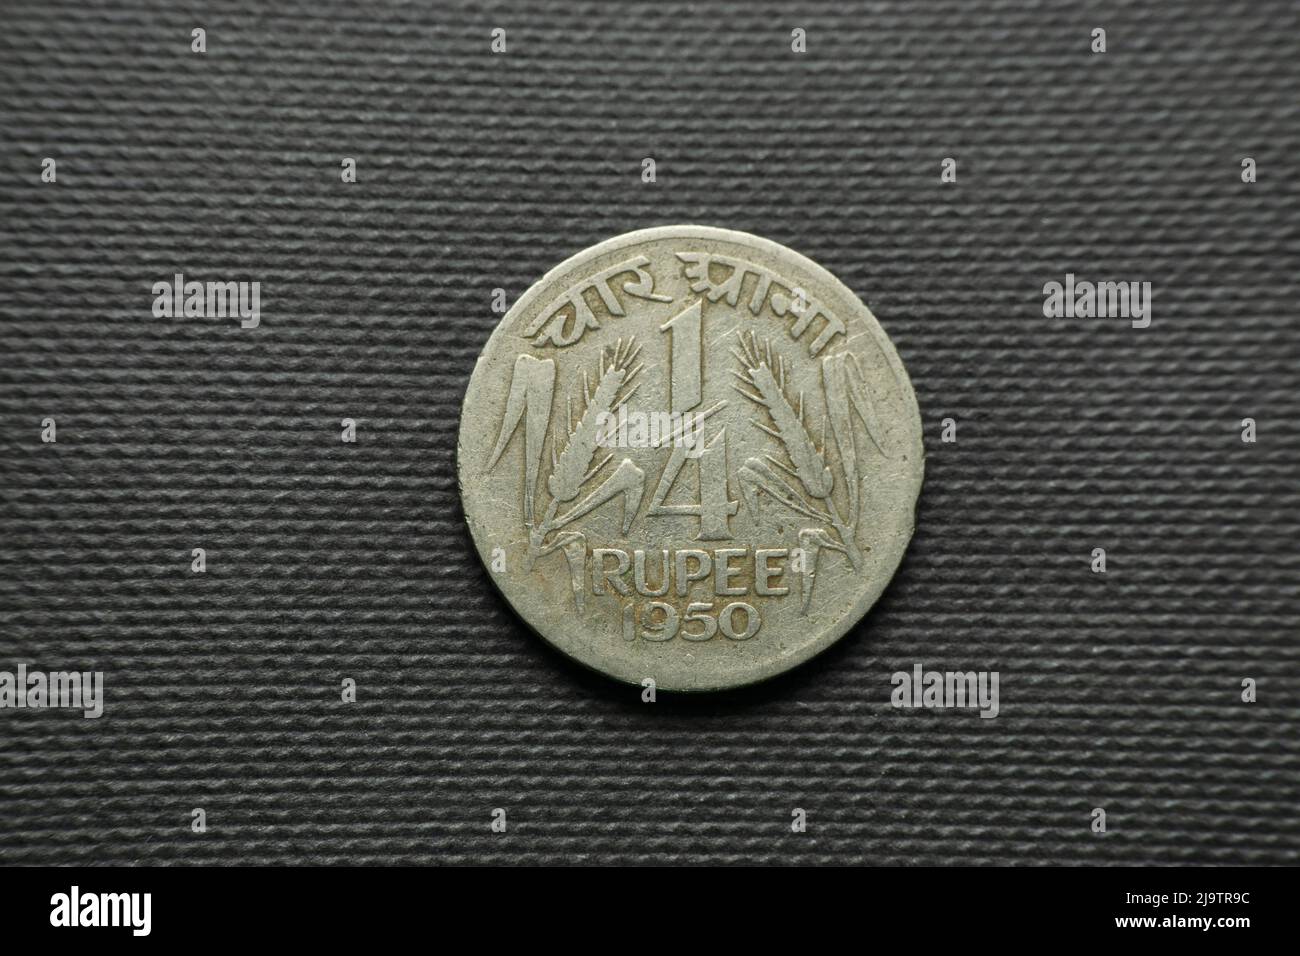 1/4 Anna Indian coin dated 1950 India, Front view Stock Photo - Alamy